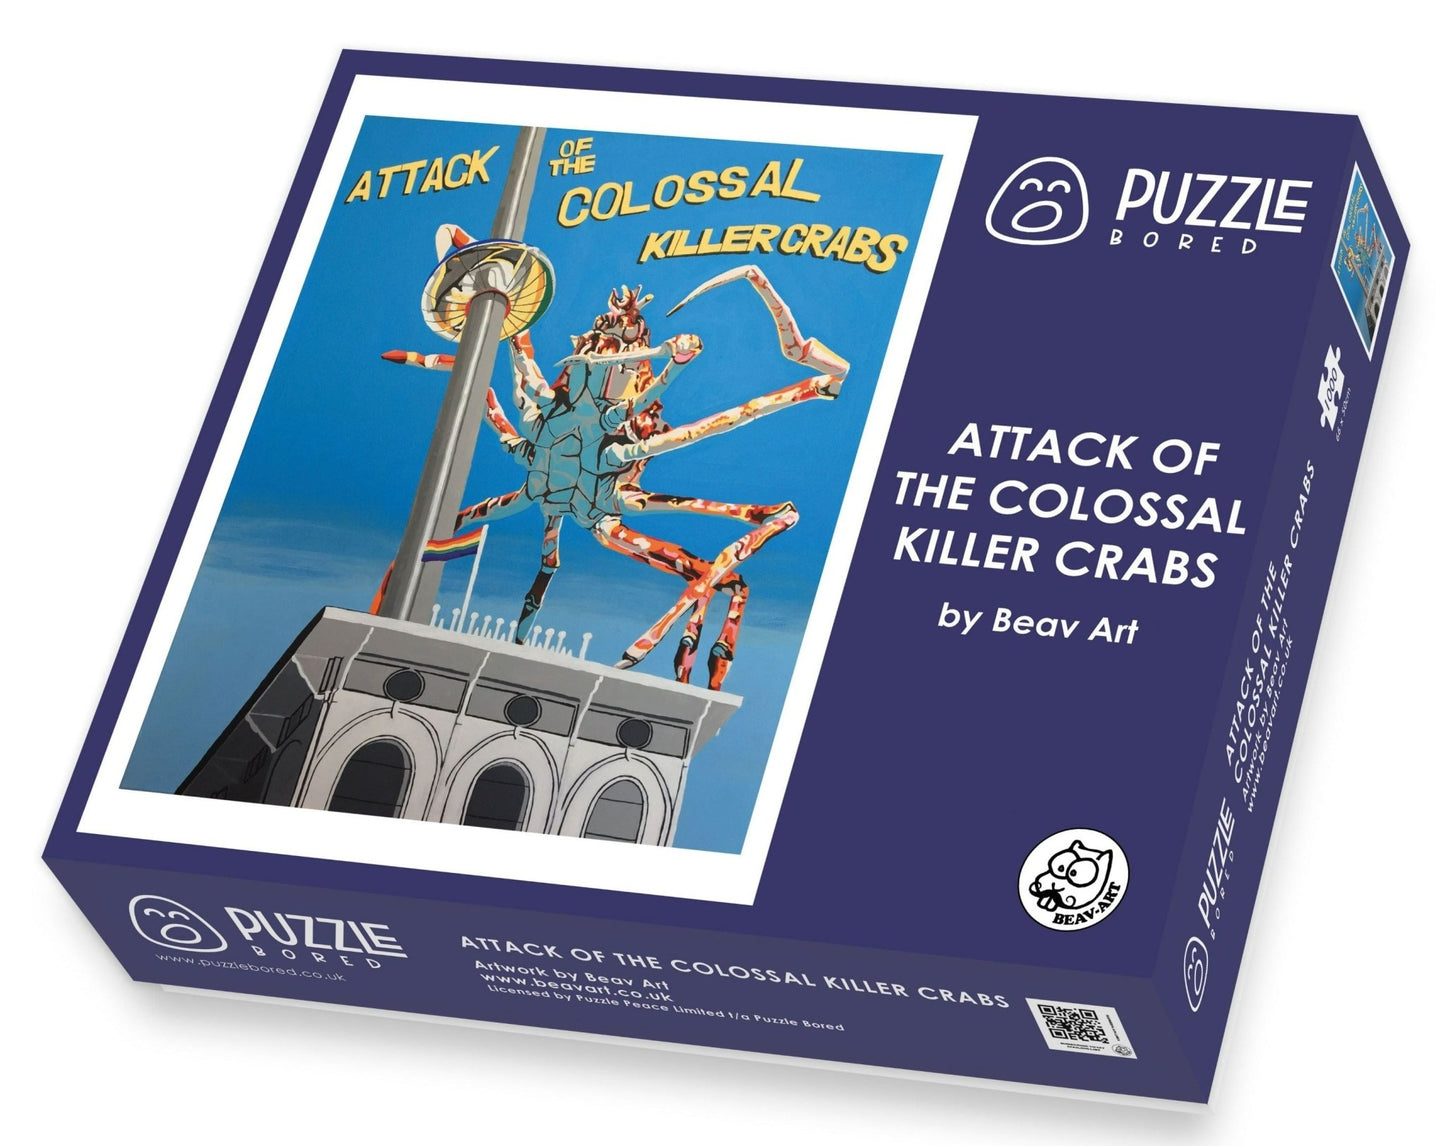 Attack of the Colossal Killer Crabs by Beav Art - Puzzle Bored